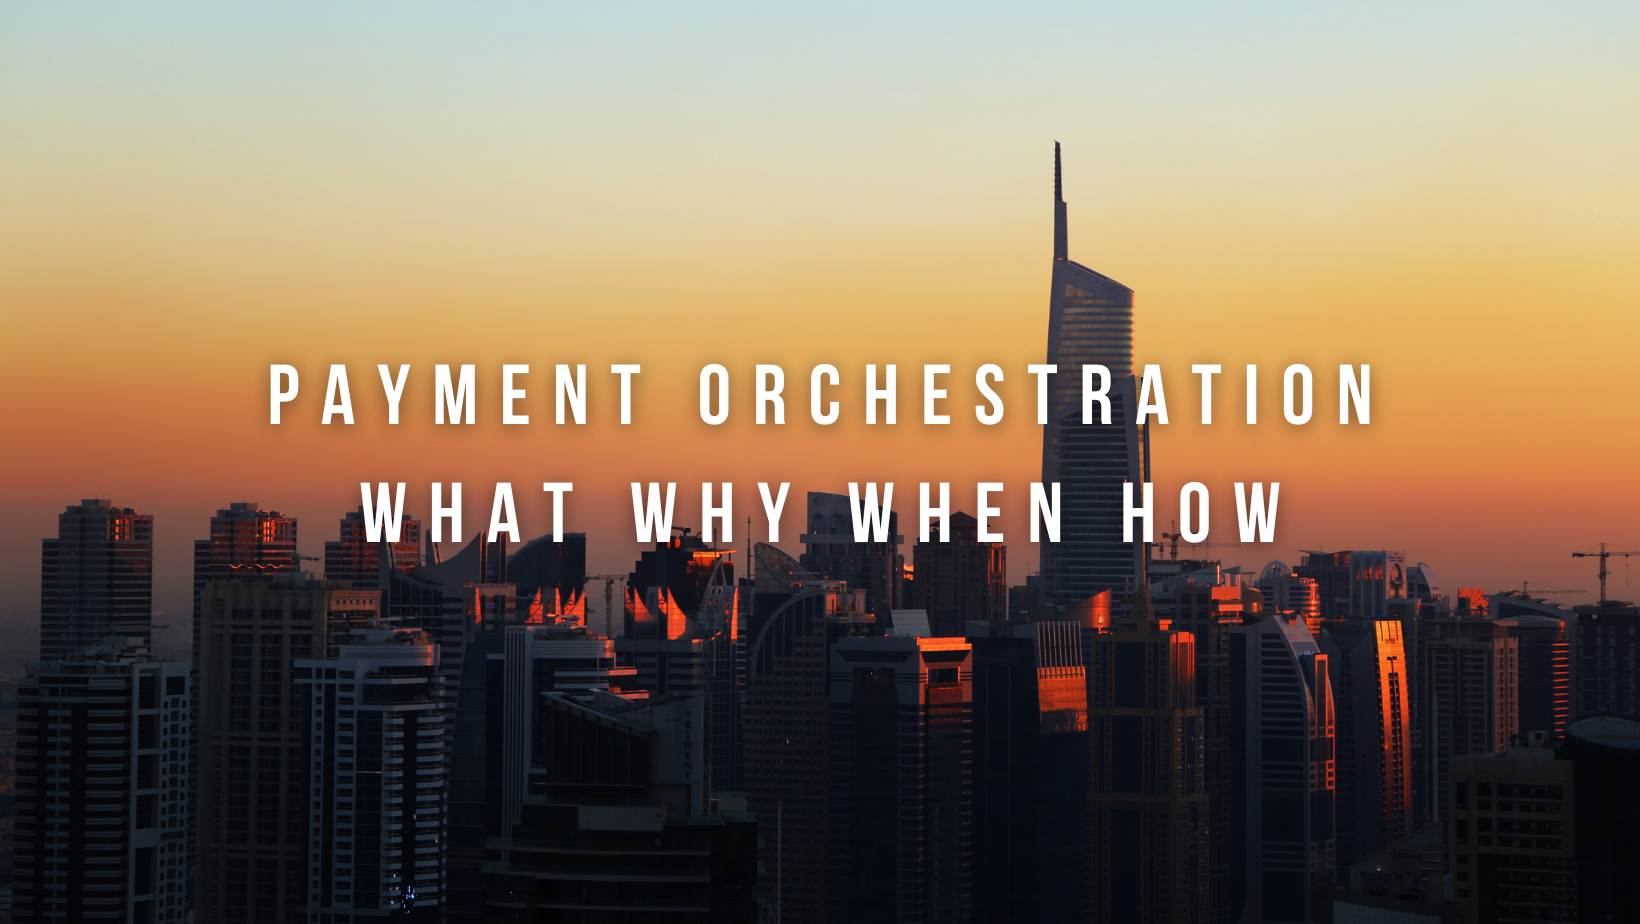 Payment Orchestration - What Why When How